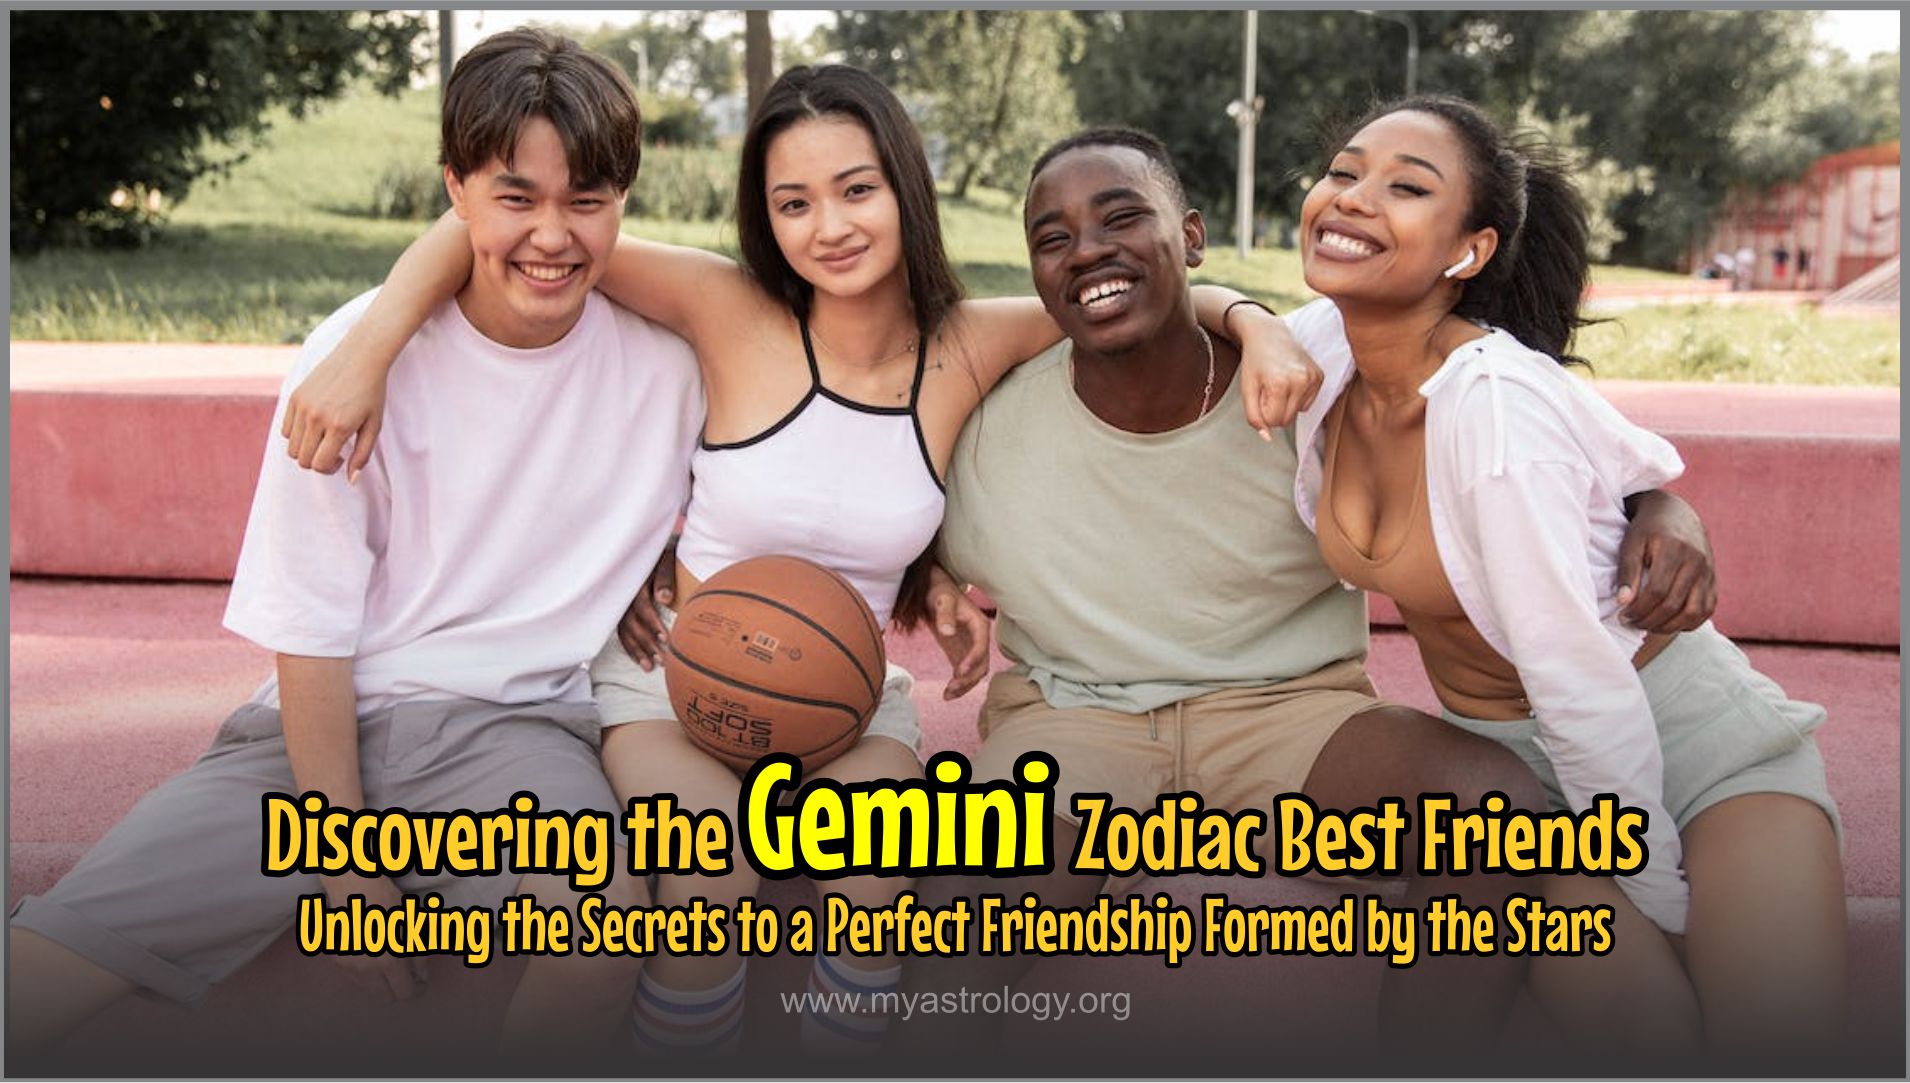 Discovering the Gemini Zodiac Best Friends: Unlocking the Secrets to a Perfect Friendship Formed by the Stars